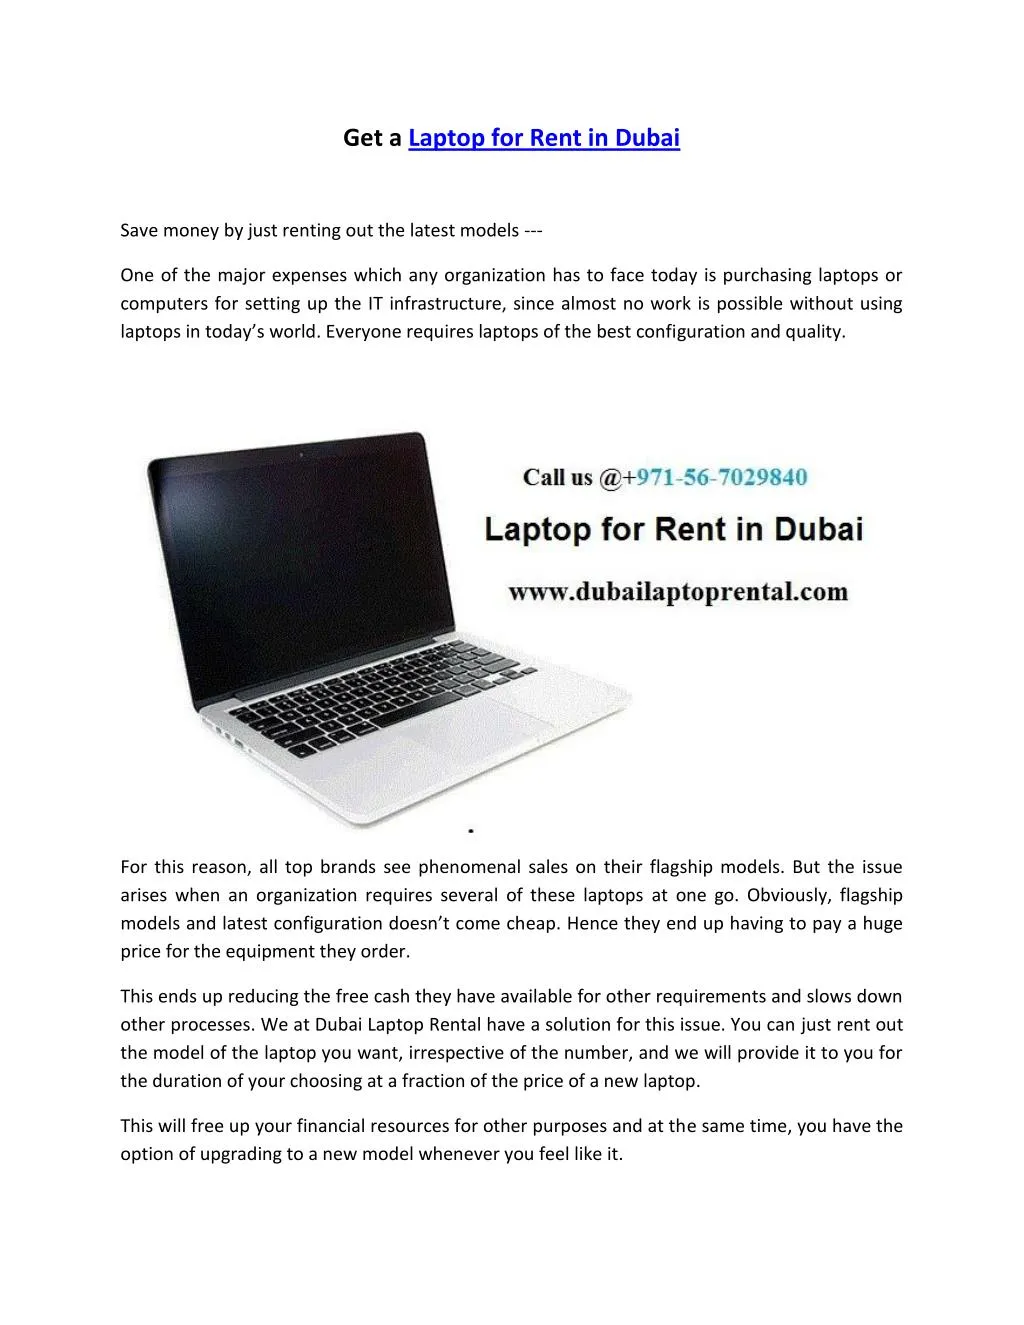 get a laptop for rent in dubai